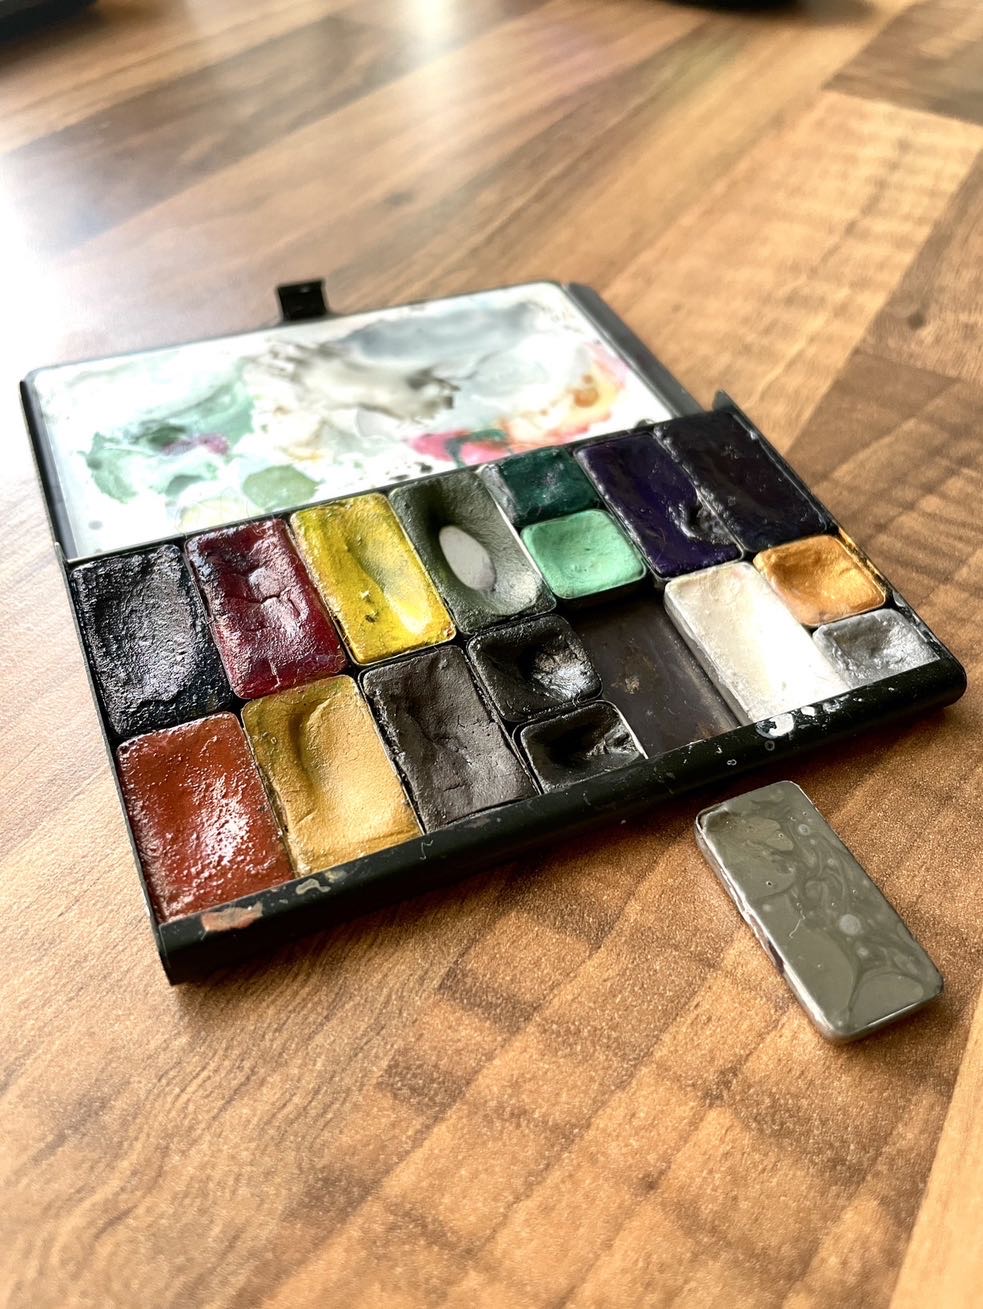 Photograph showing a small ArtToolKit palette with a single pan of pan set out separate from it which is grey in colour.